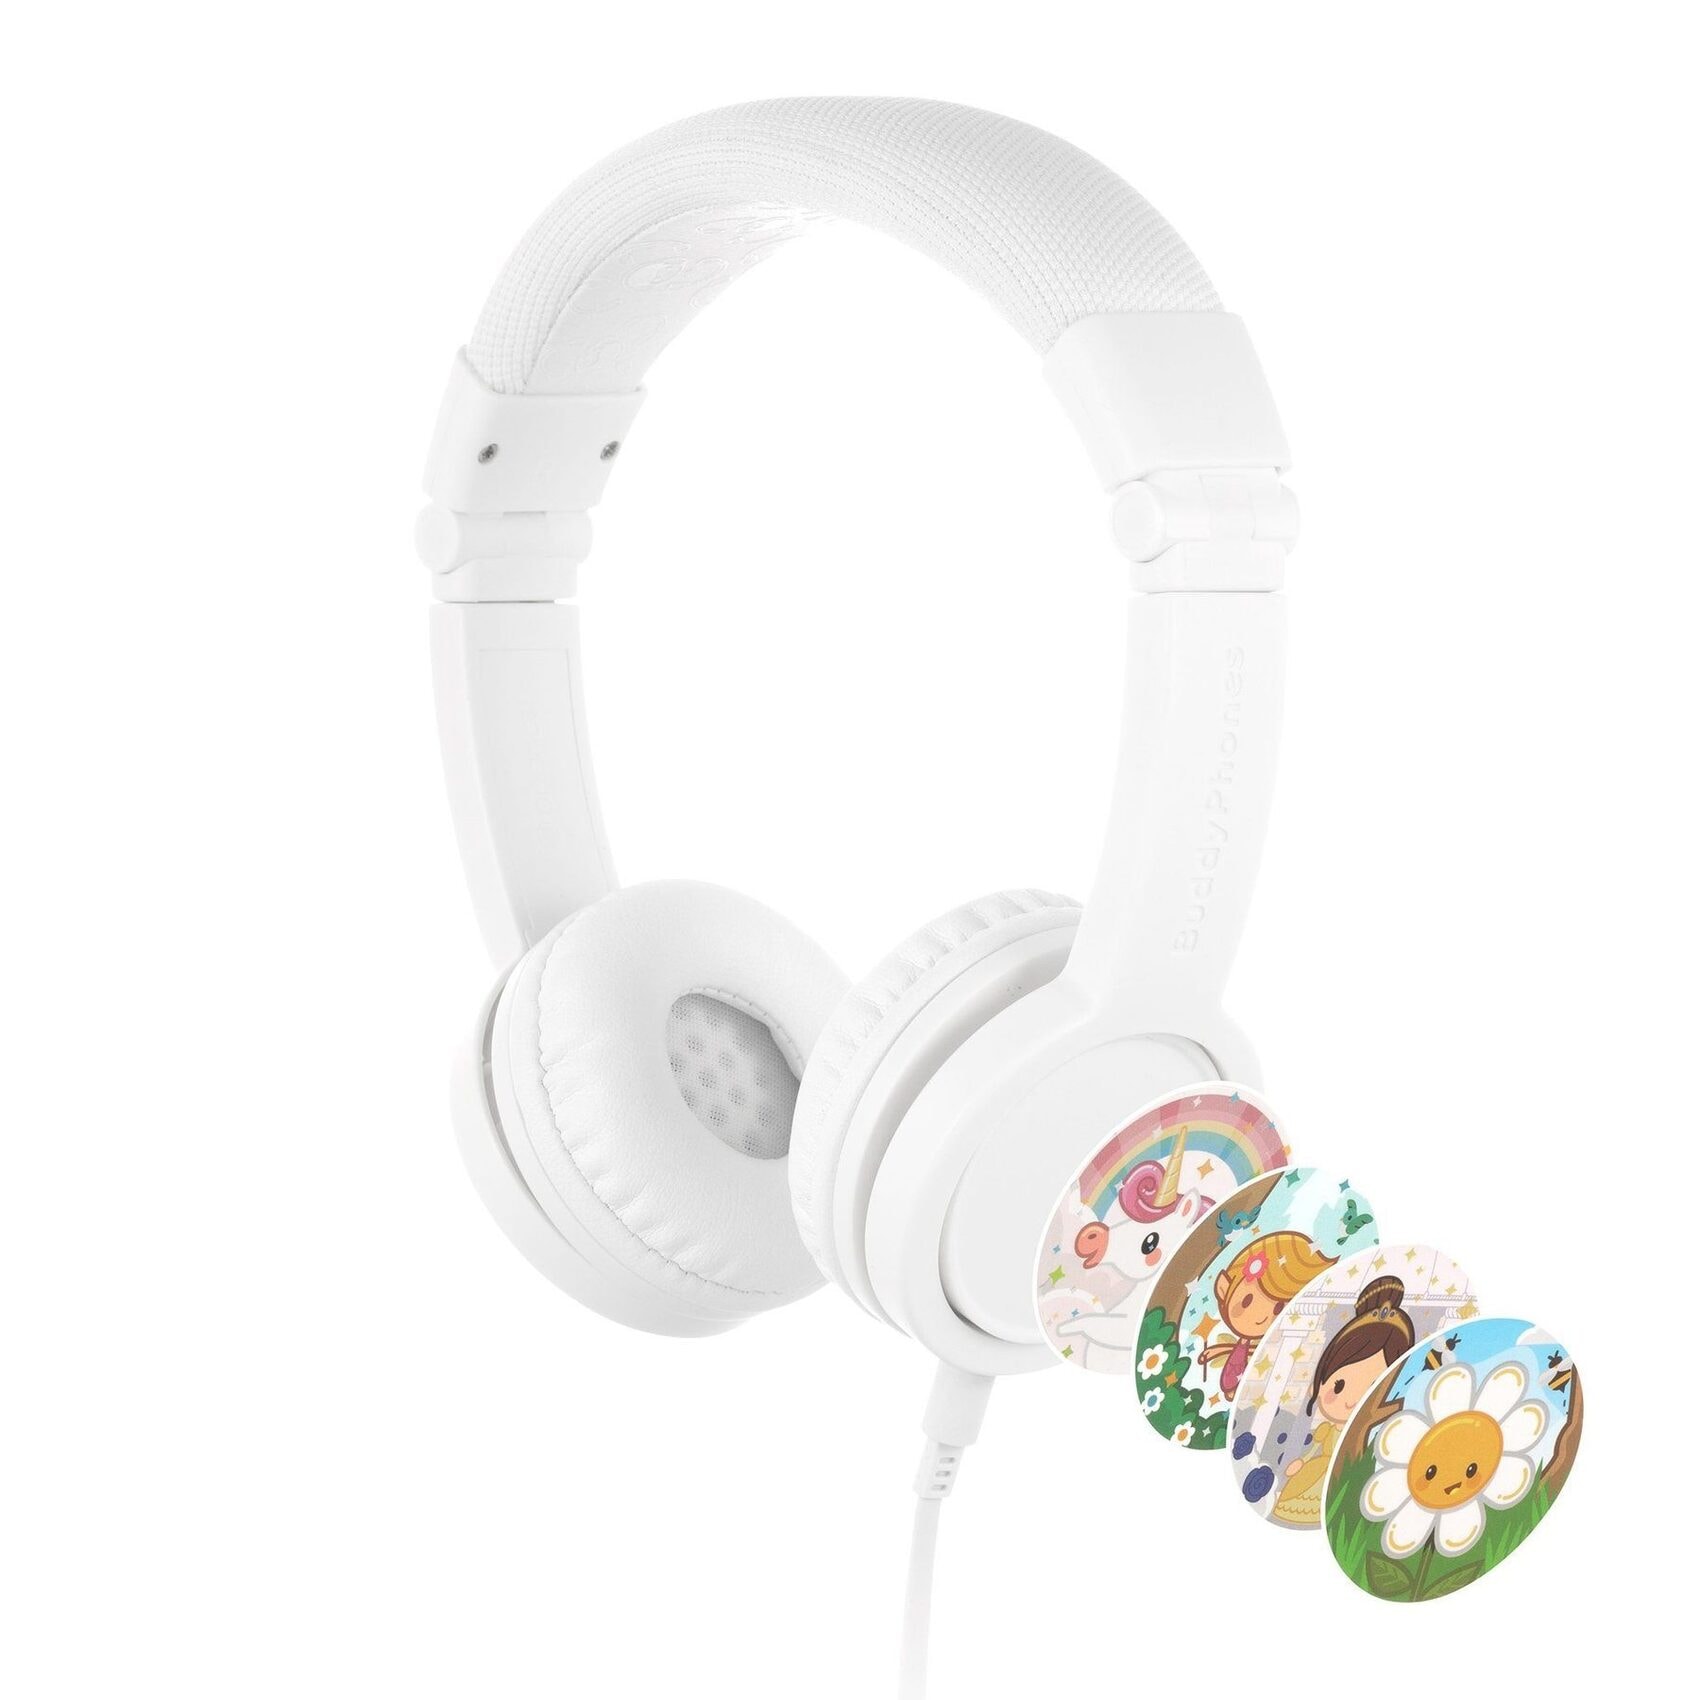 Buy Buddyphones Explore Plus Foldable Headphones with Mic - Snow White Online - Shop Smartphones, Tablets & Wearables on Carrefour UAE